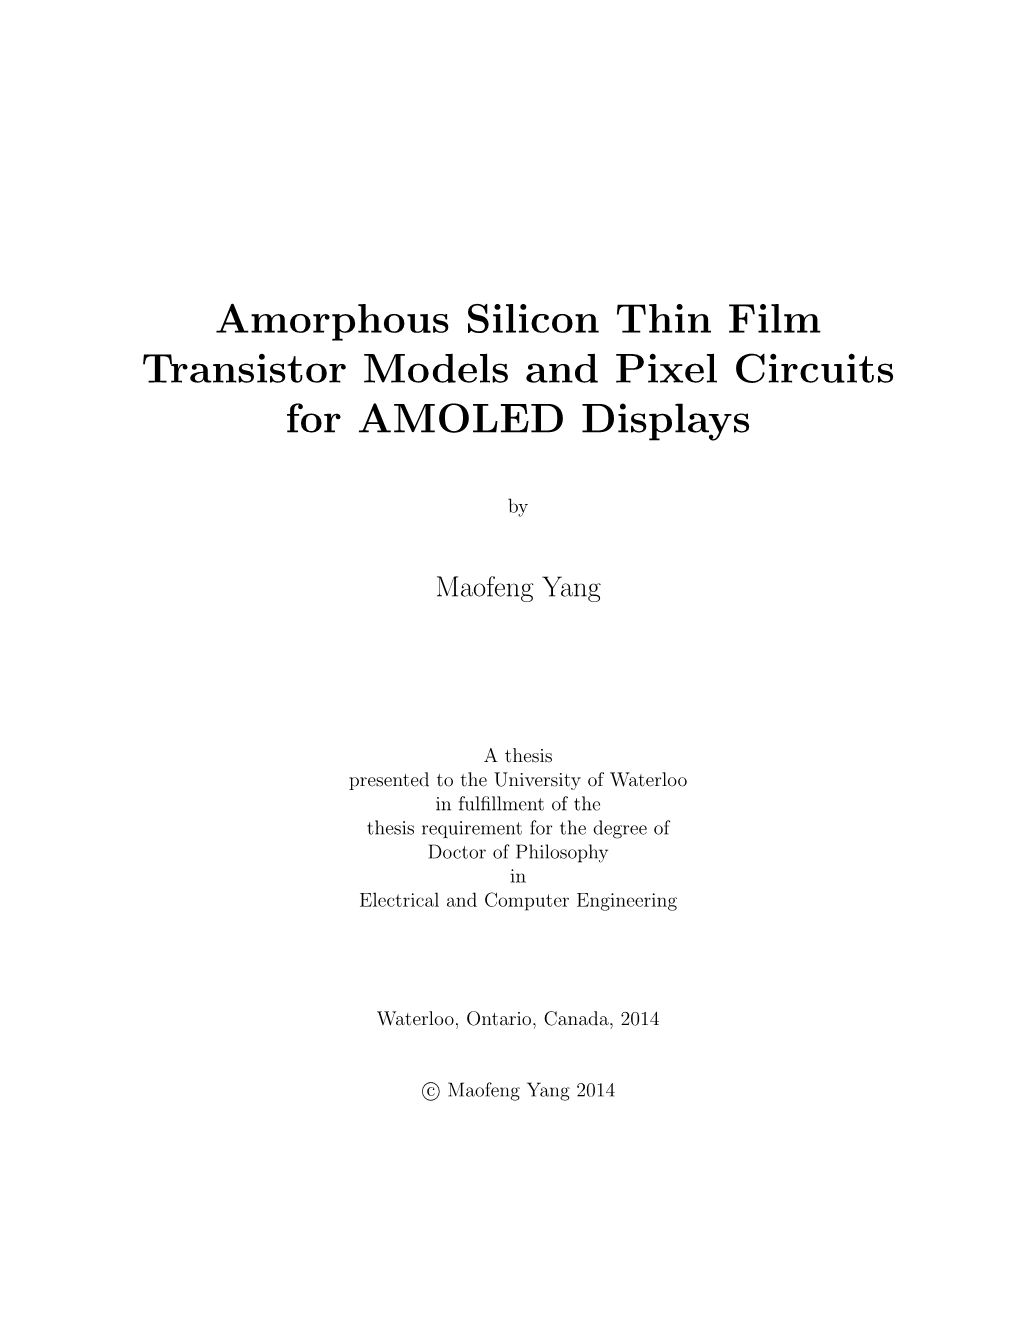 Amorphous Silicon Thin Film Transistor Models and Pixel Circuits for AMOLED Displays